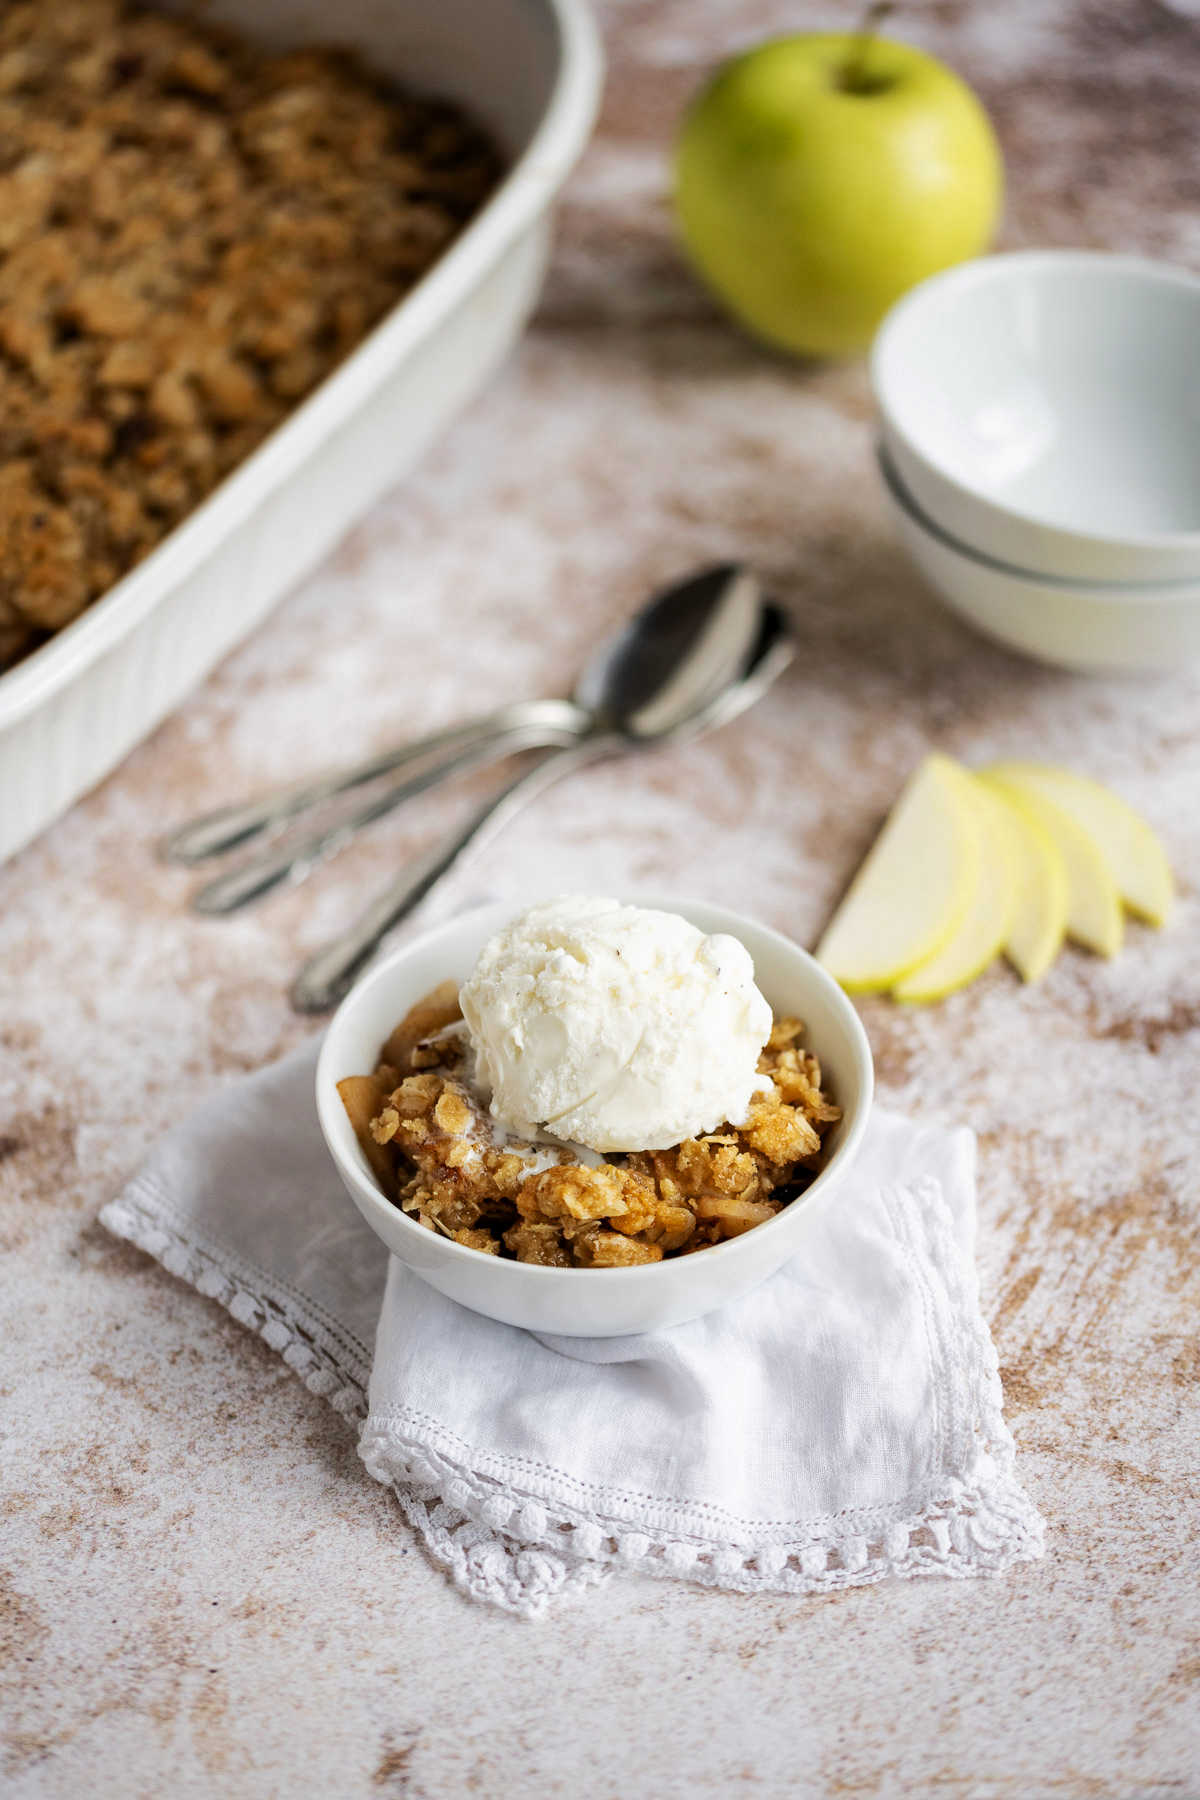 apple crisp in a white bowl with a scoop of vanilla ice cream on top sitting on a counter with apple and baking dish in the background.